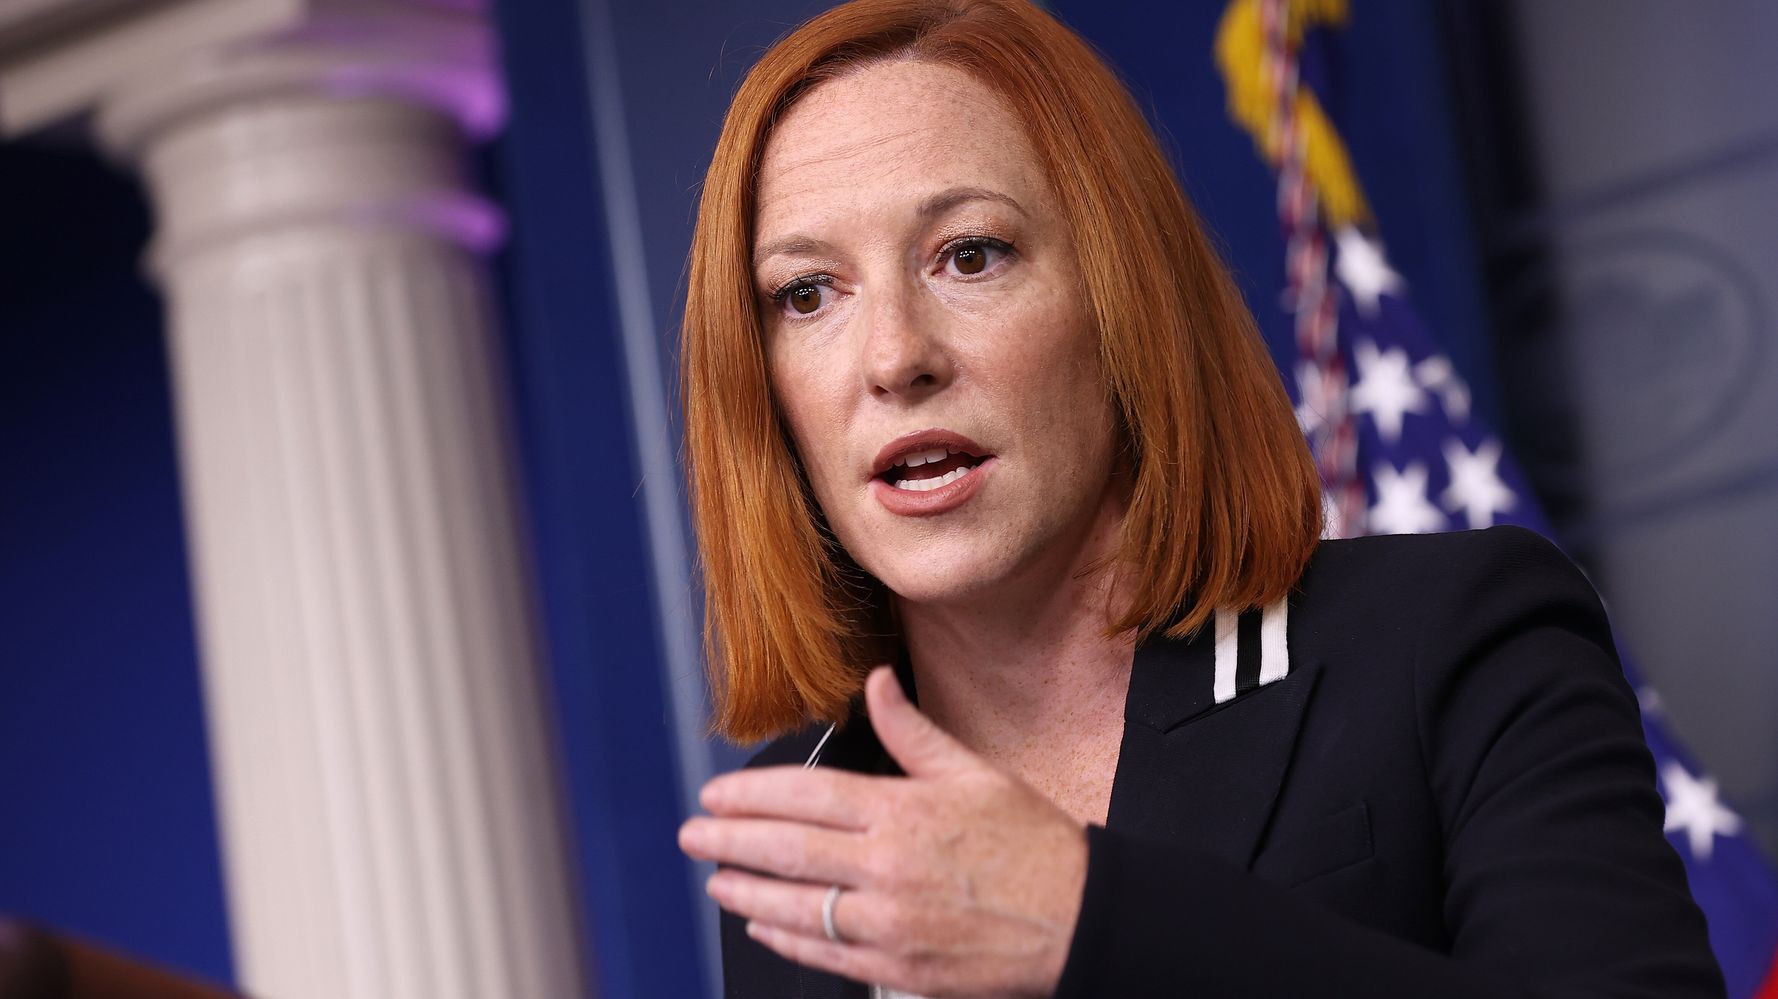 Jen Psaki Shreds Male Reporter With Response On Why Biden Supports Right To An Abortion